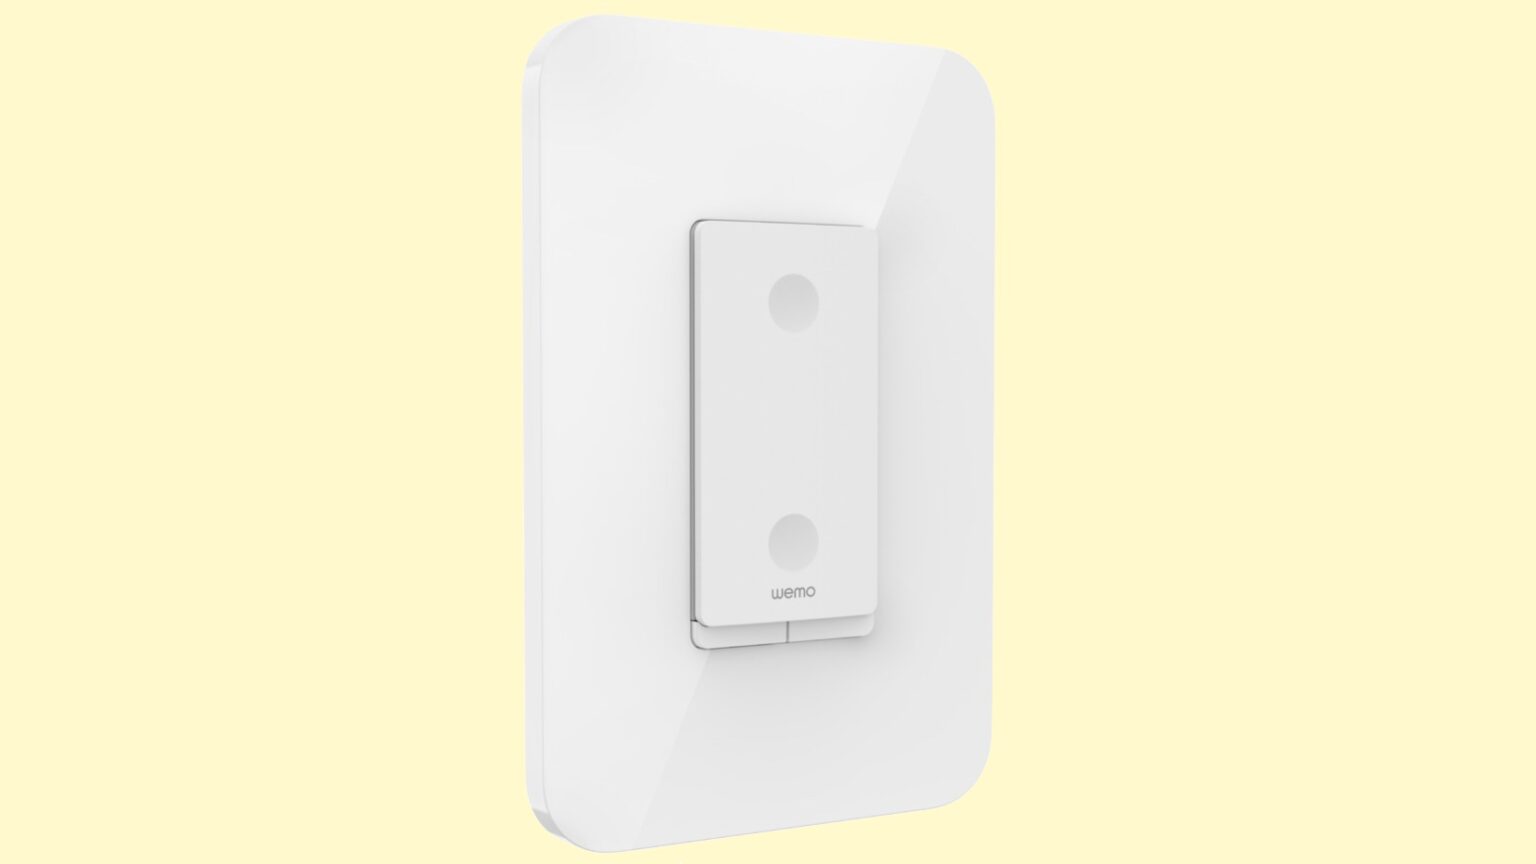 Keep up with the latest smartphone tech with Wemo's Smart Dimmer with Thread